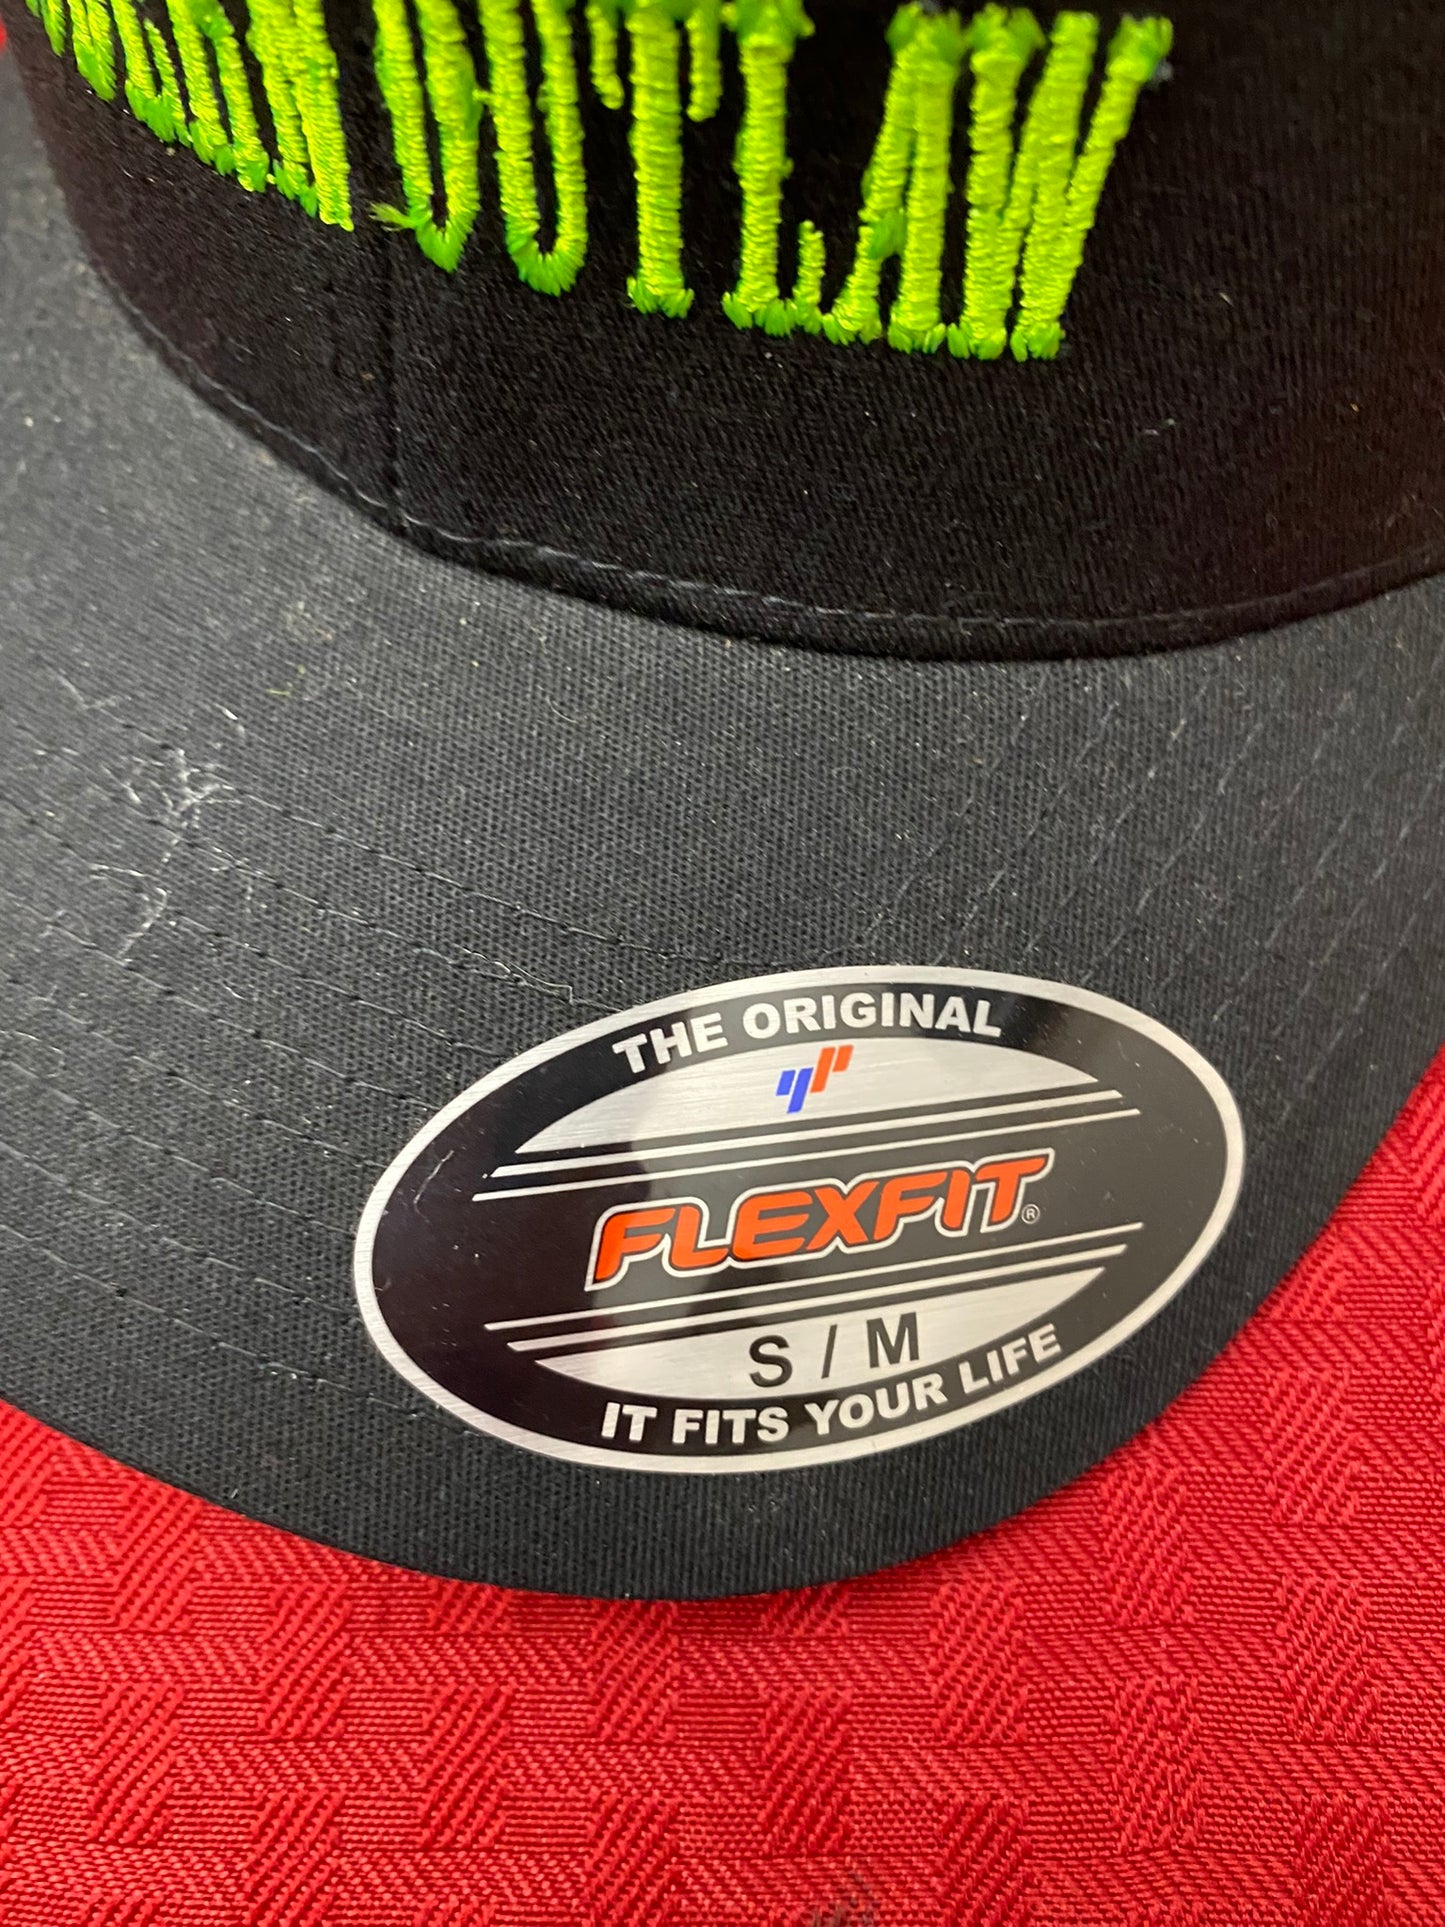 Modern Outlaw - Live by Your Own Rules Flex Fit Cap Neon Green Embroidery